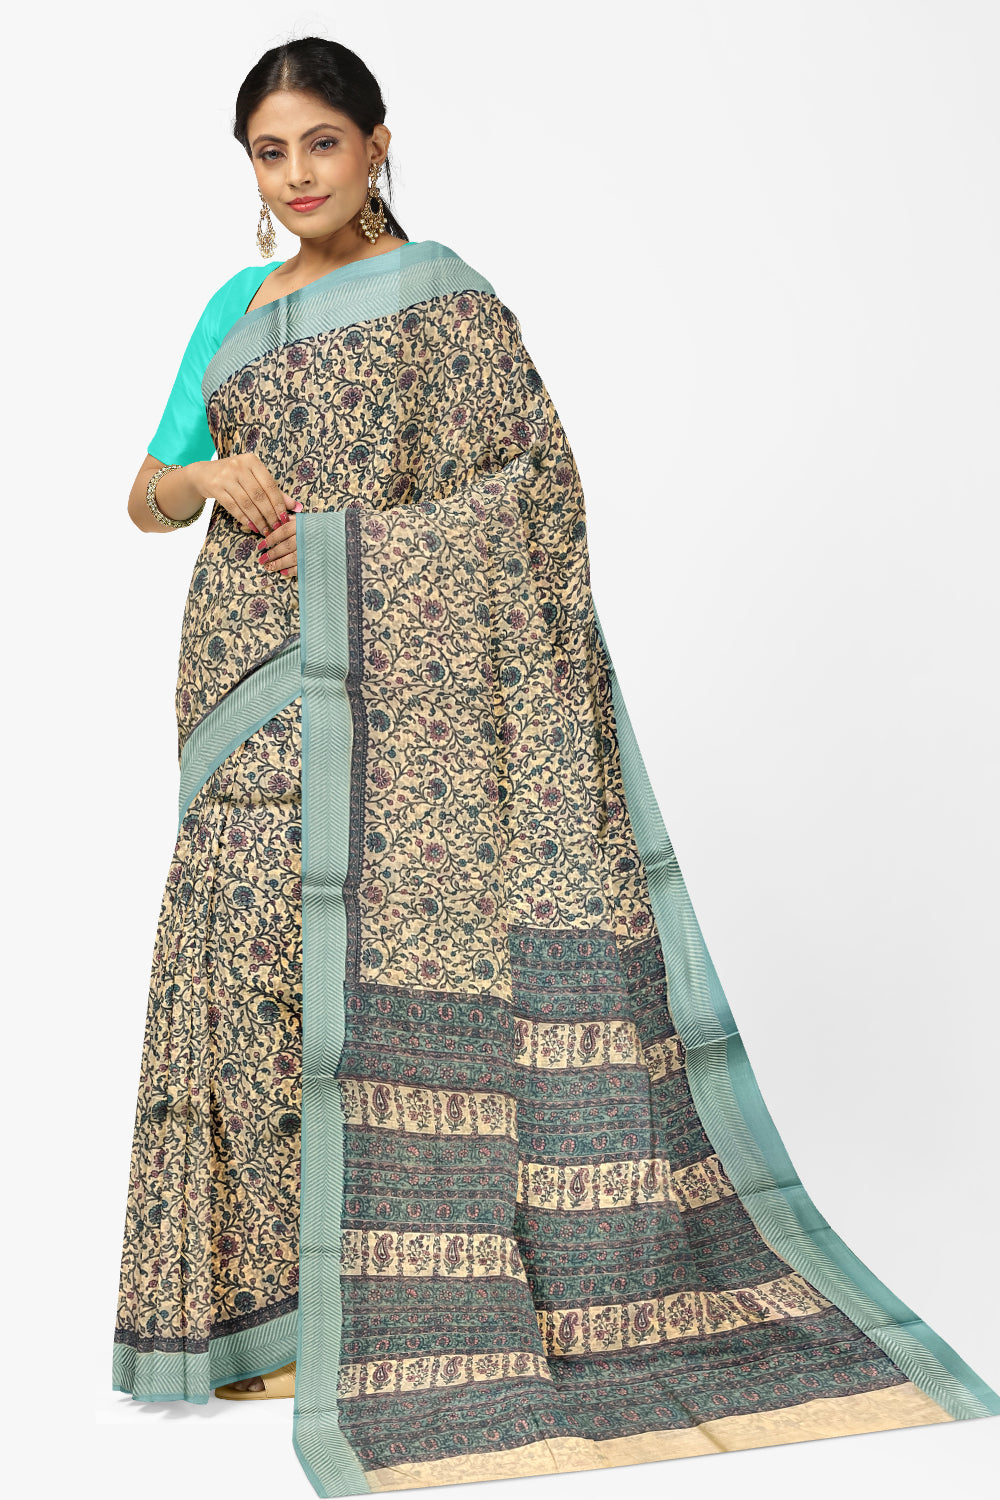 Southloom Cotton Floral Printed Saree with Blue Border